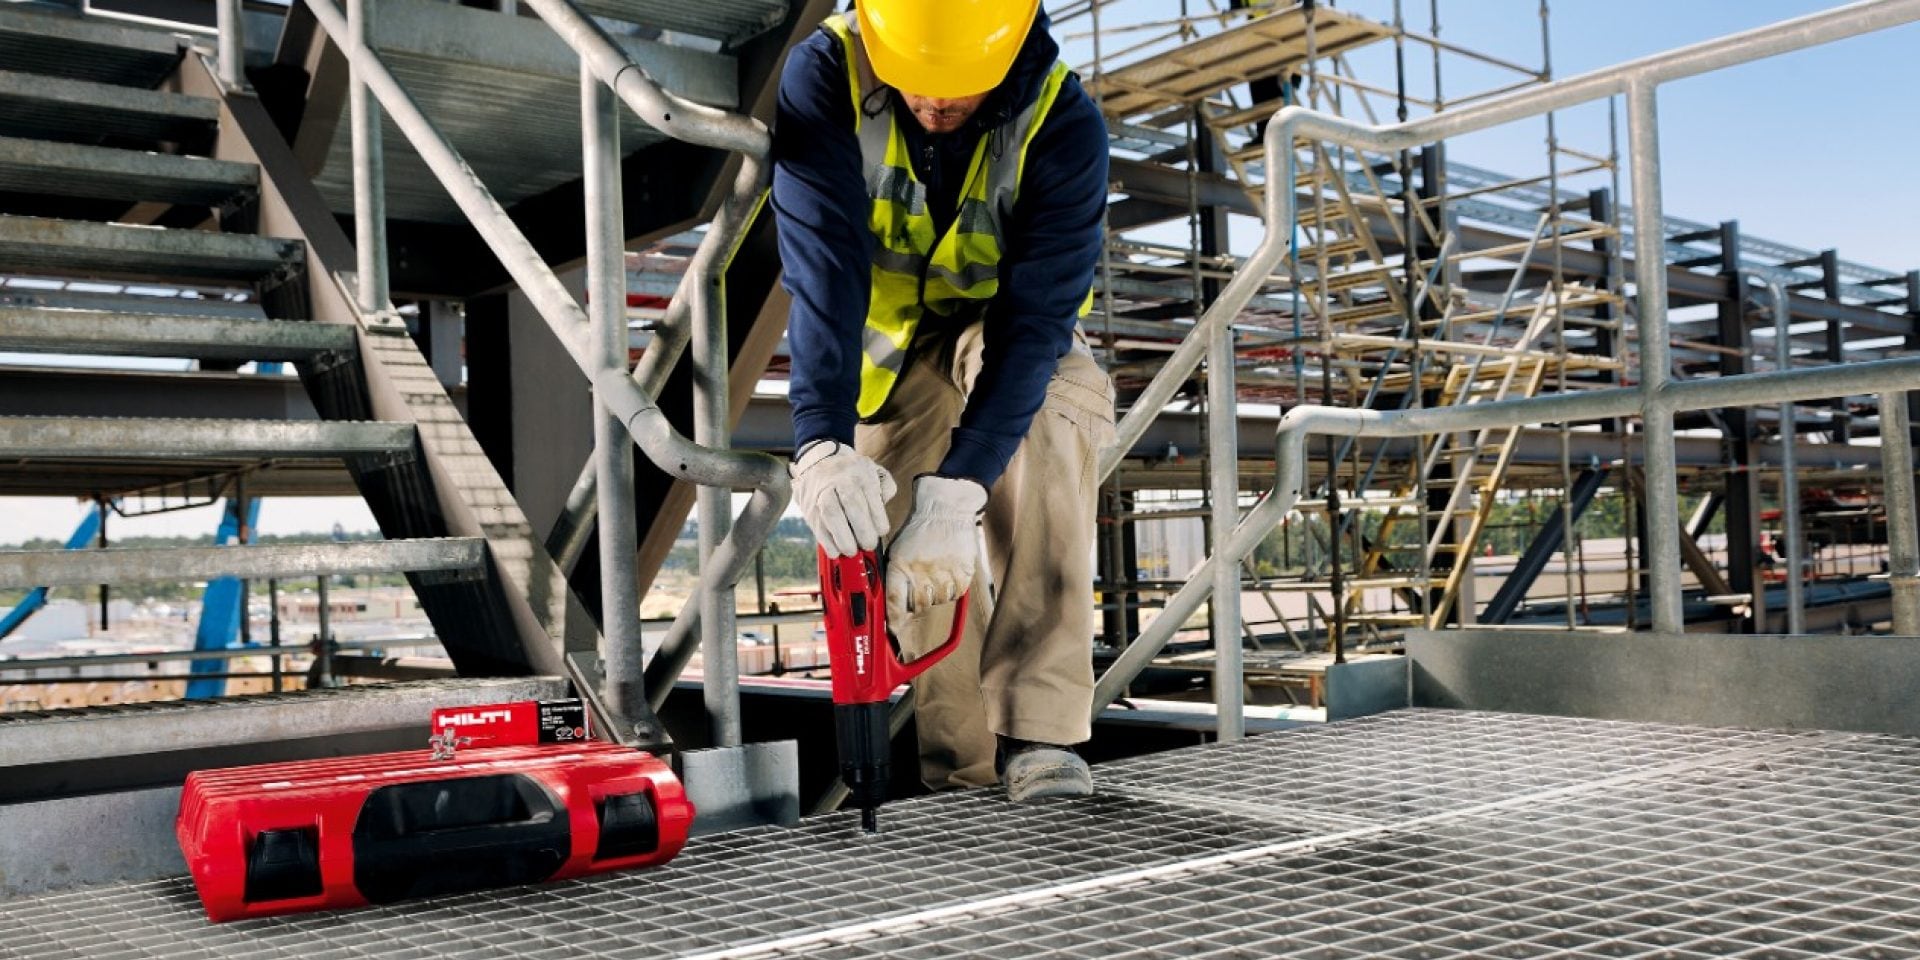 Fixing gratings and checker plates with Hilti direct fastening tools